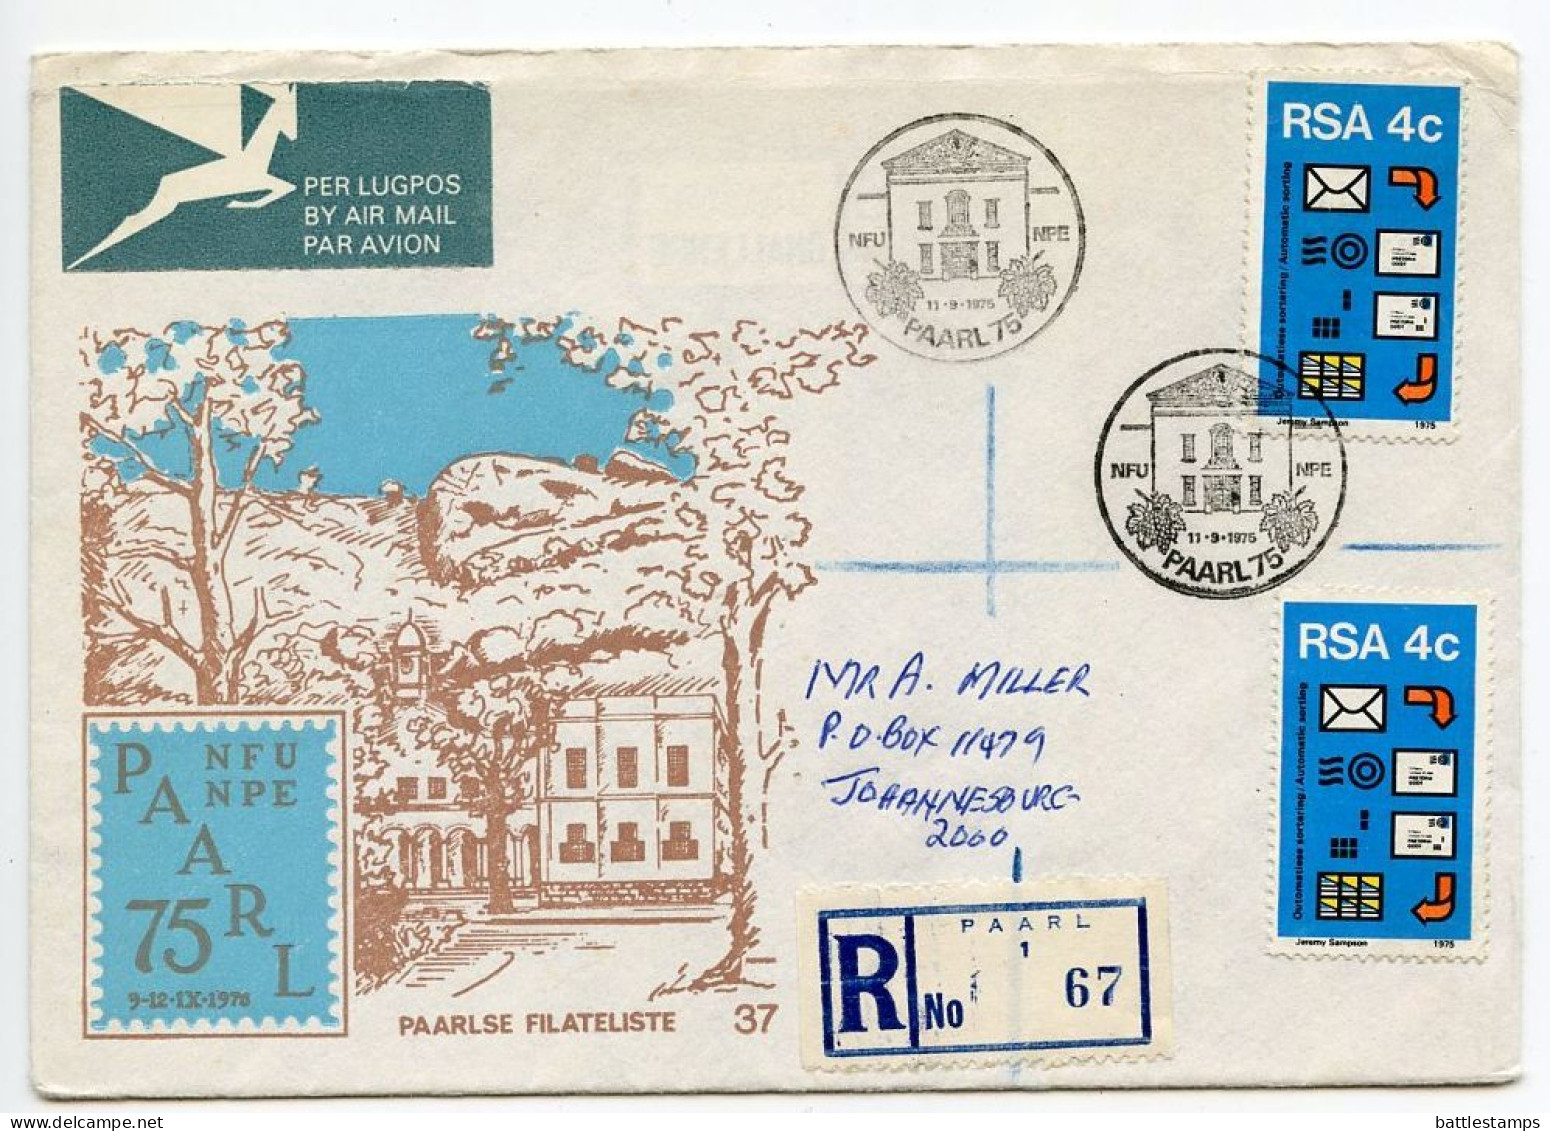 South Africa 1975 Scott 448 Registered FDC - Paarl, Postal Automation - FDC